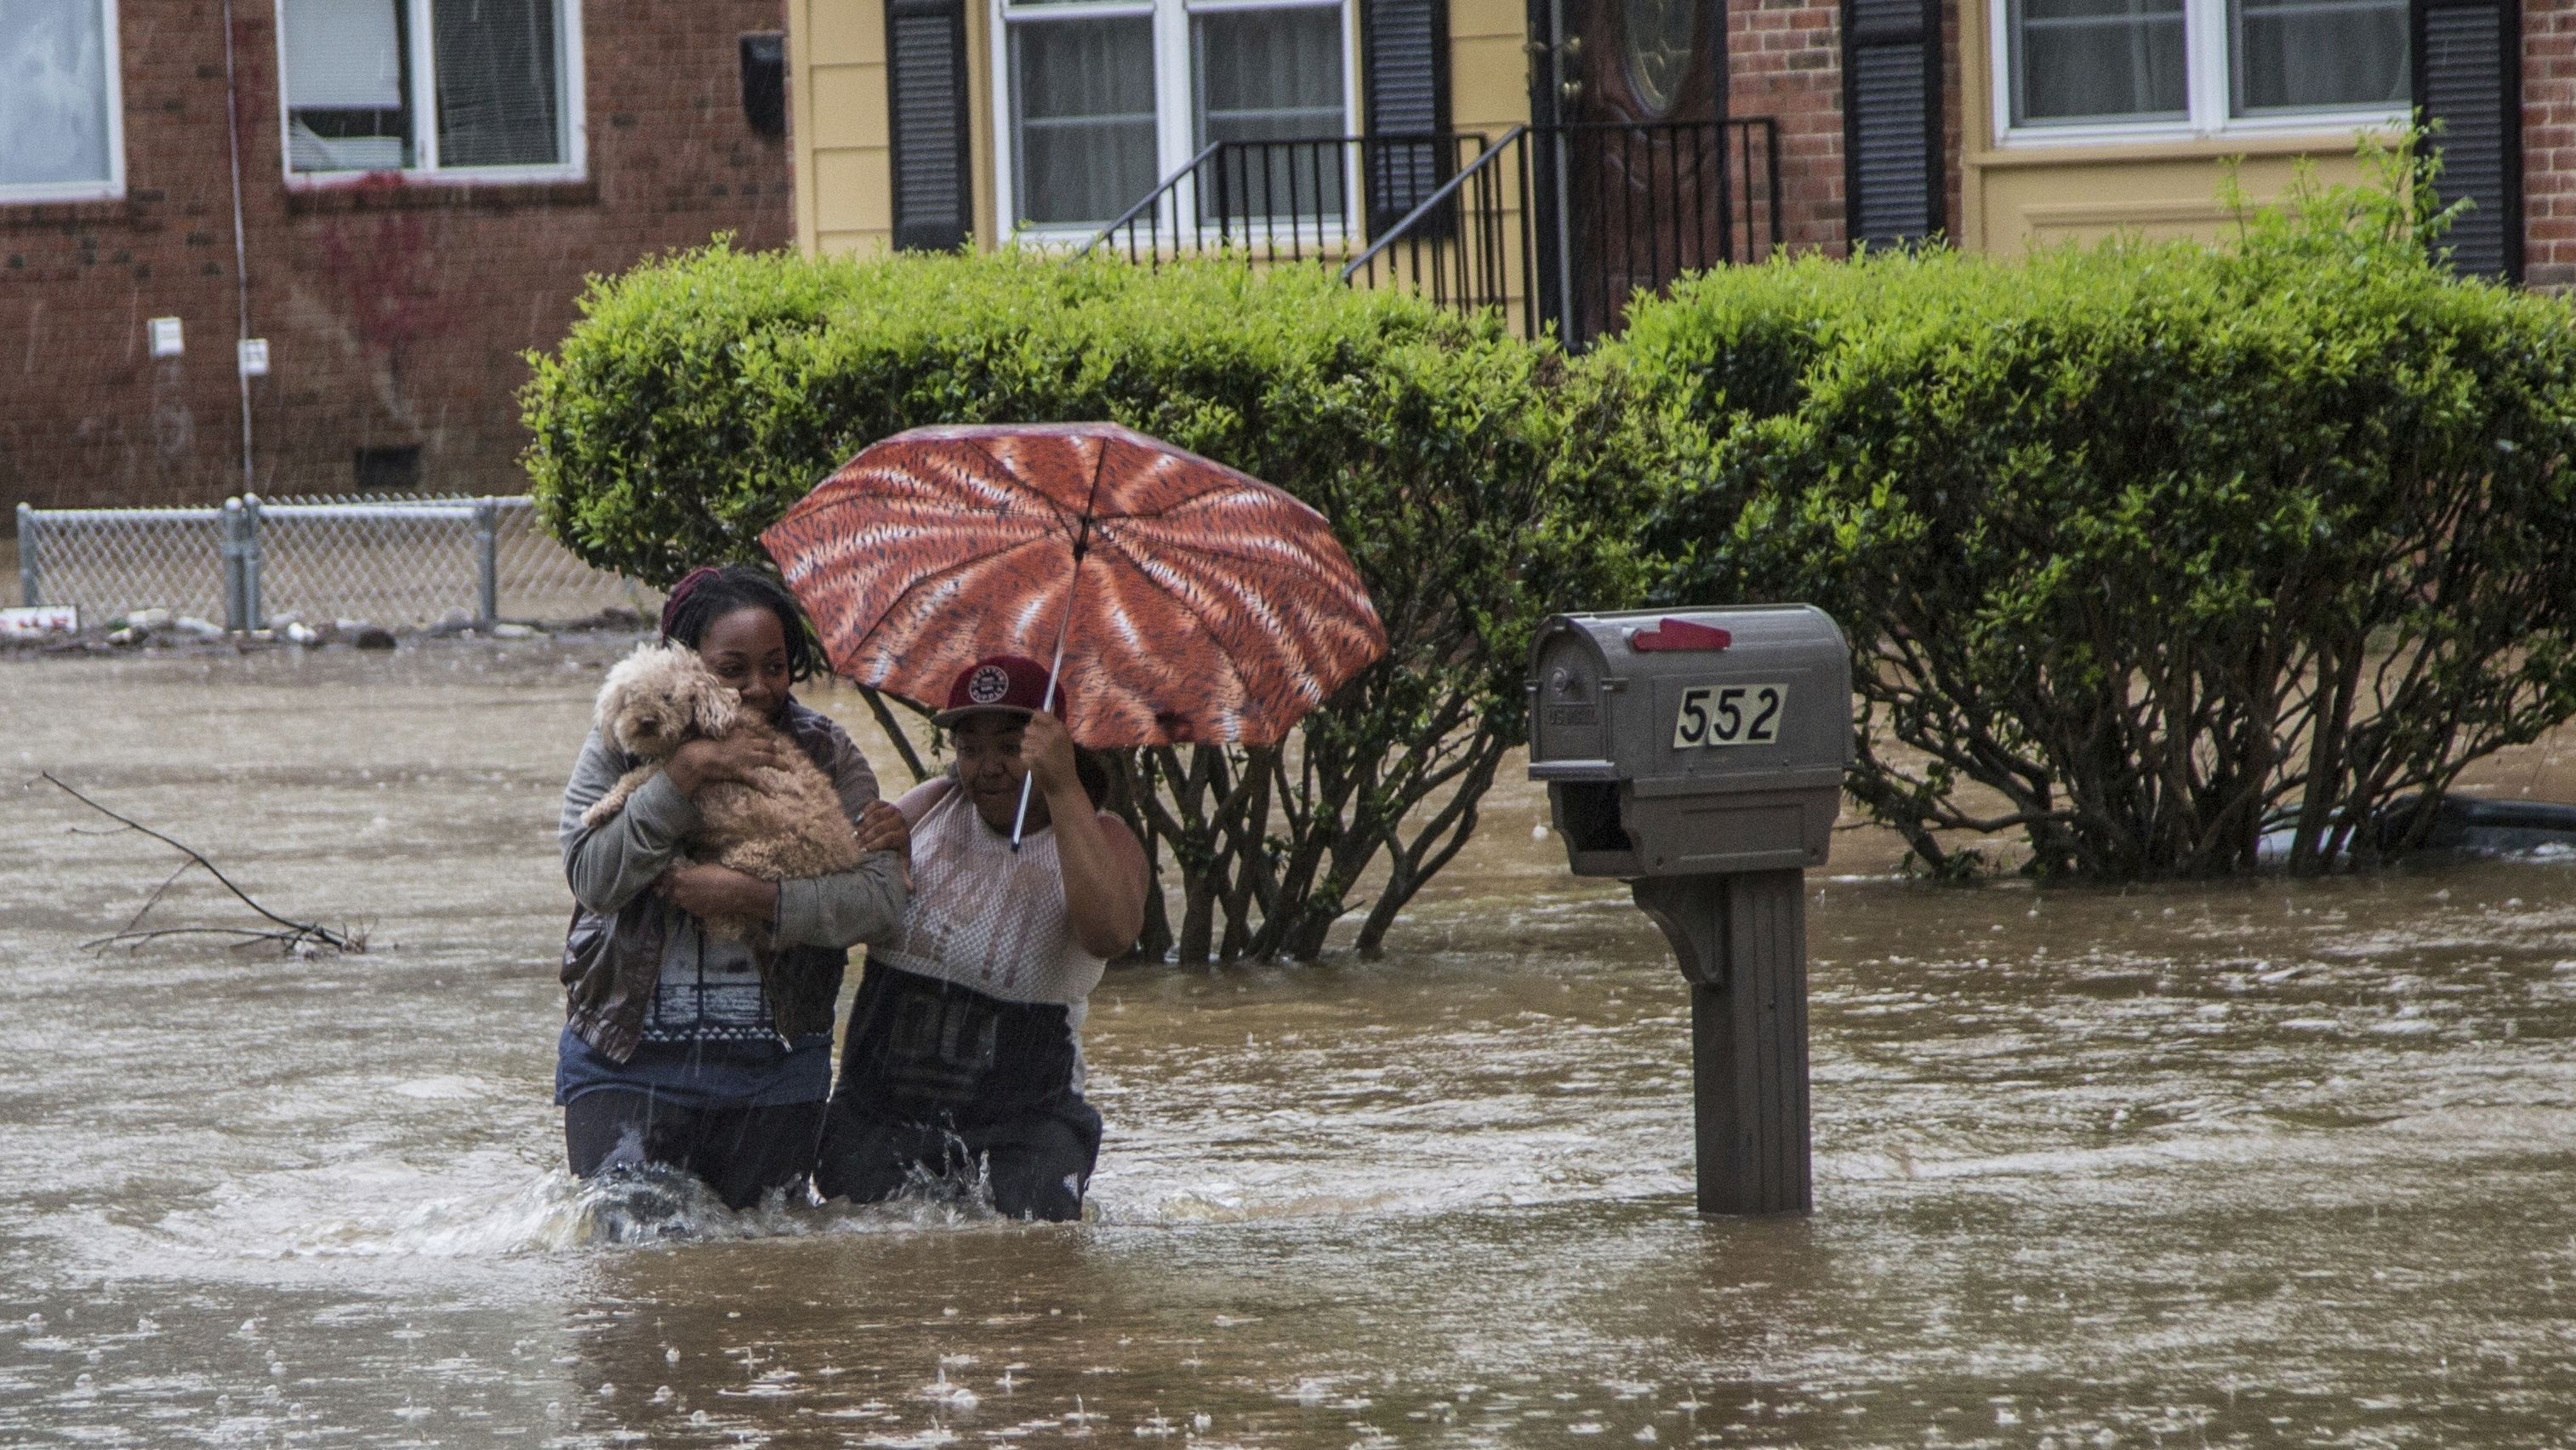 Nautica Jackson, left, and Aniya Ruffin walk through floodwaters with their dog as water threatened to enter their home in Raleigh, North Carolina.